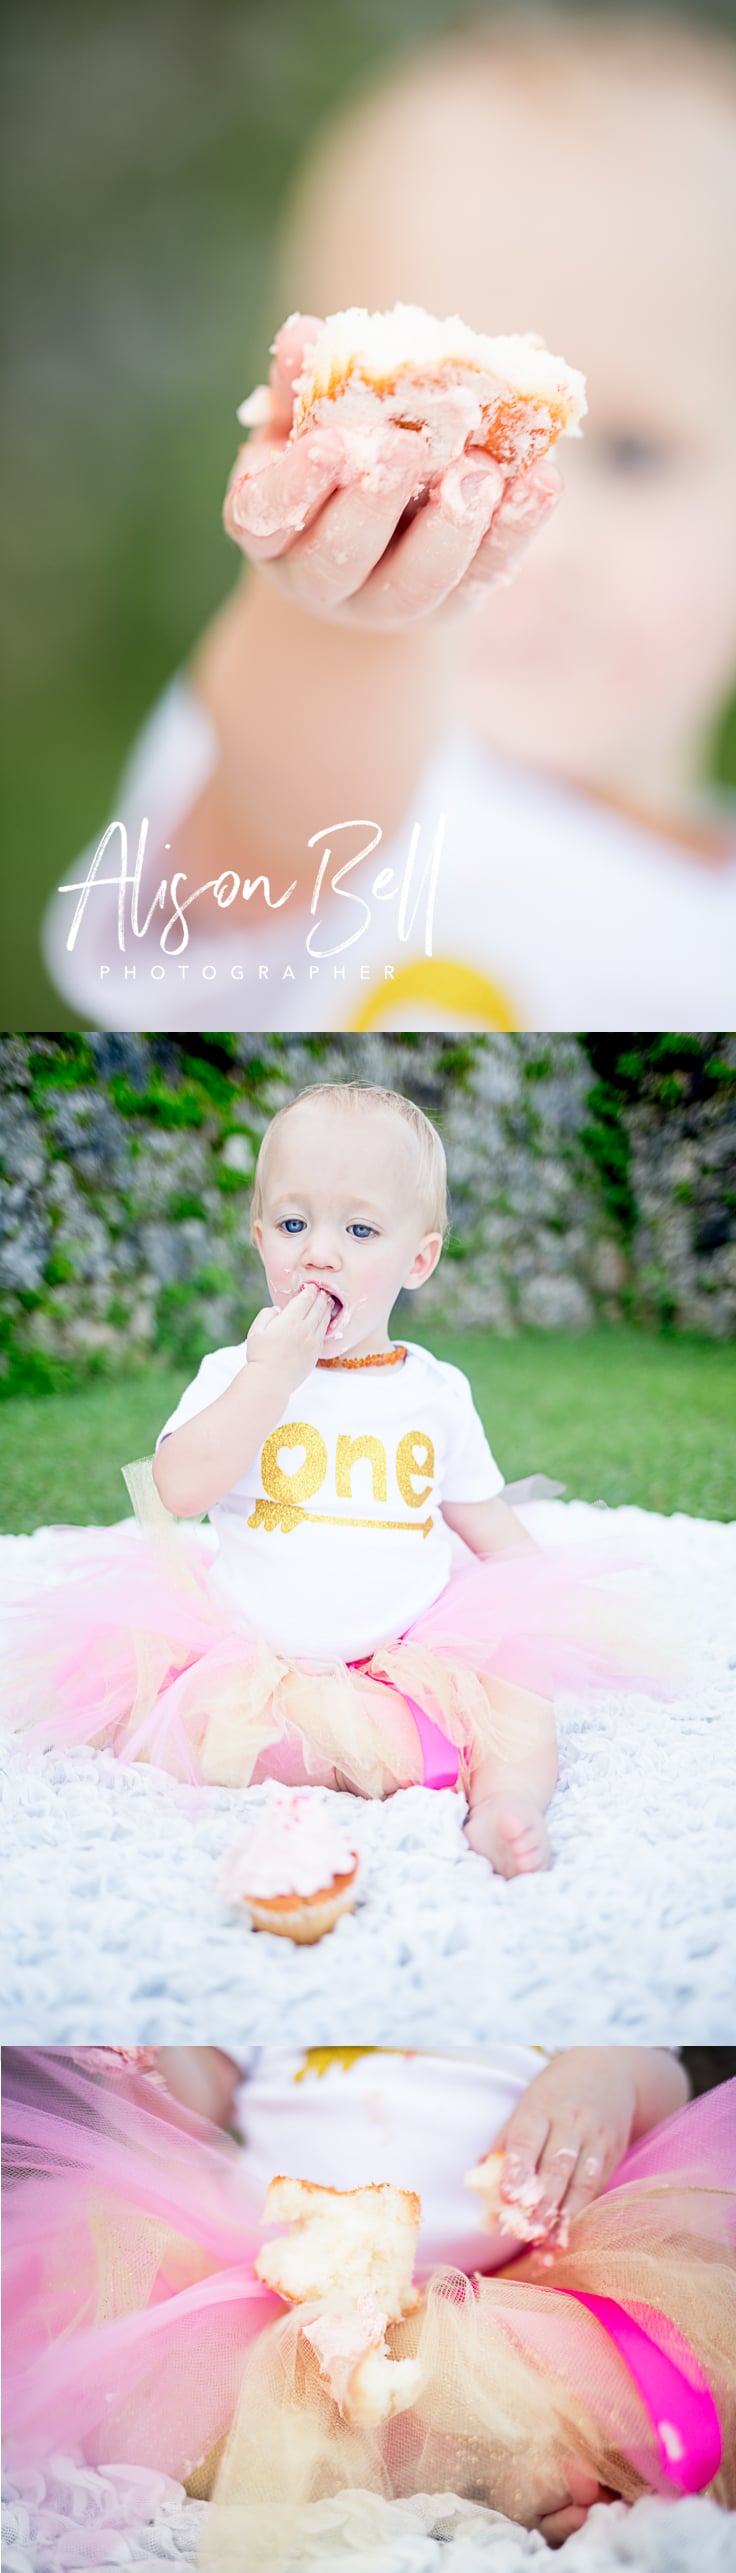 One year birthday photo session and cake smash with a cupcake in Okinawa Japan at Zakimi Castle by Alison Bell, Photographer #alisonbellphotog alisonbellphotographer.com